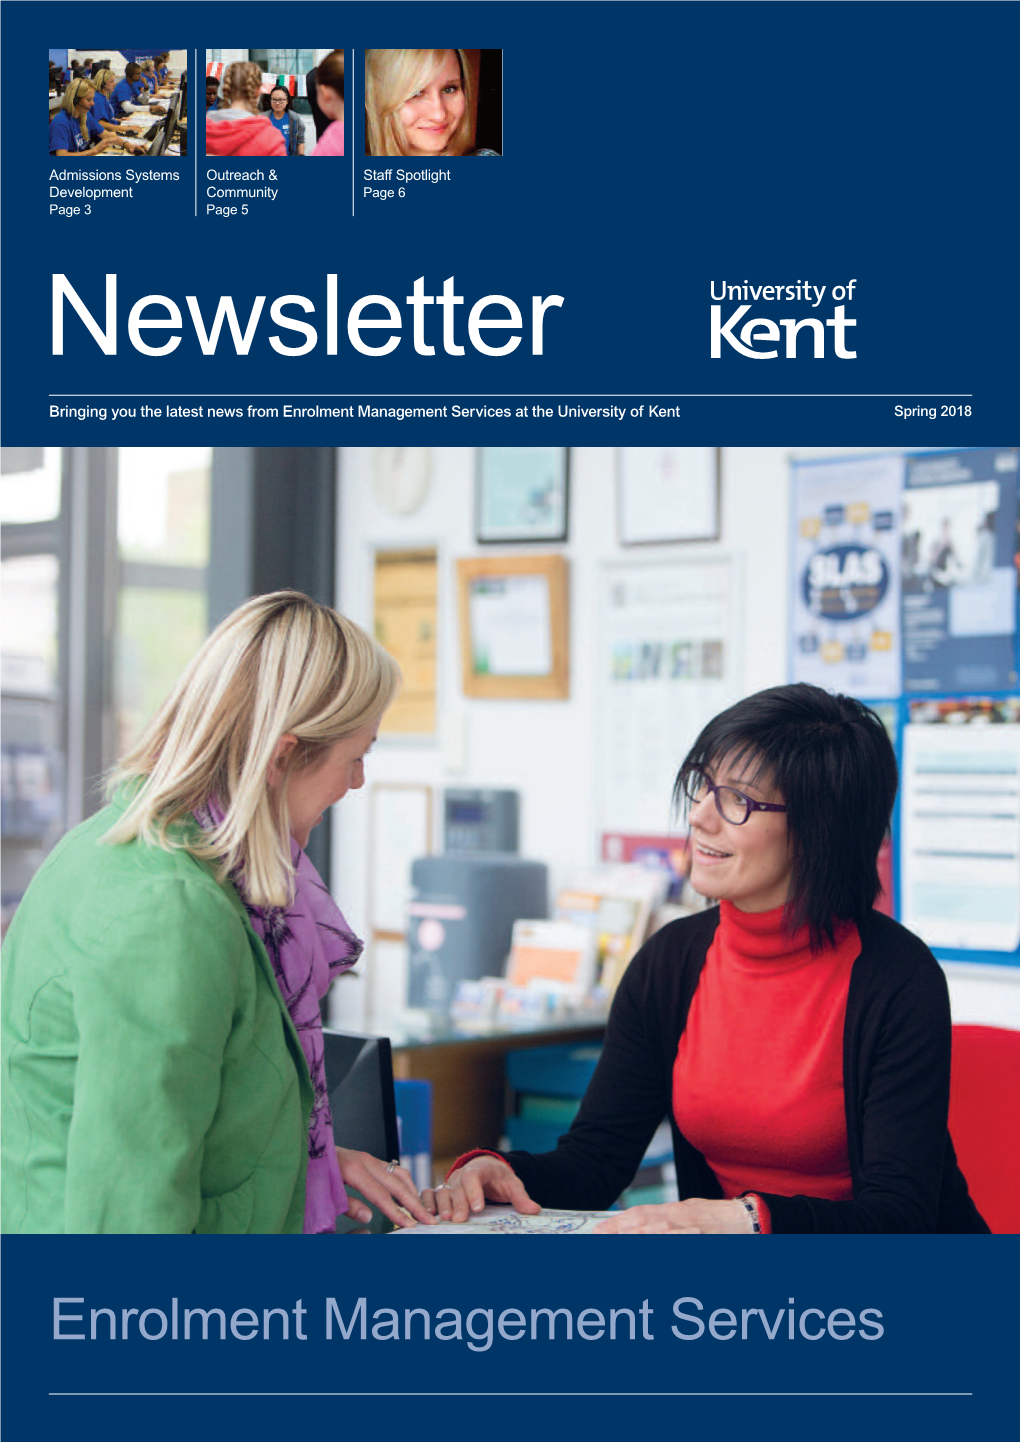 Newsletter Bringing You the Latest News from Enrolment Management Services at the University of Kent Spring 2018